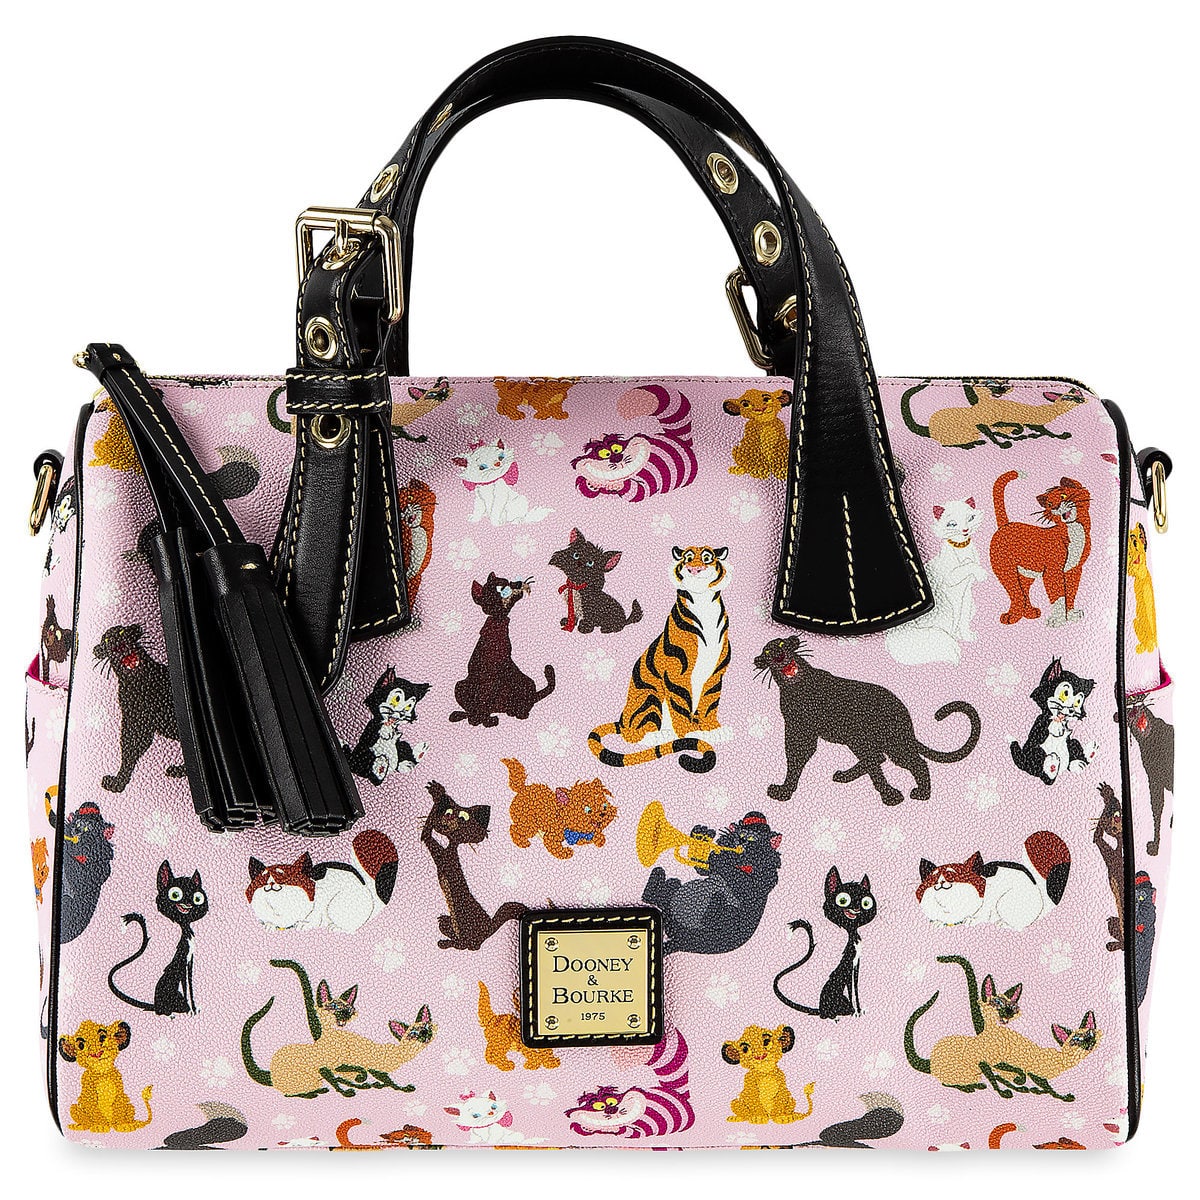 “Disney Cats” Dooney & Bourke Collection Out Now – DisKingdom.com